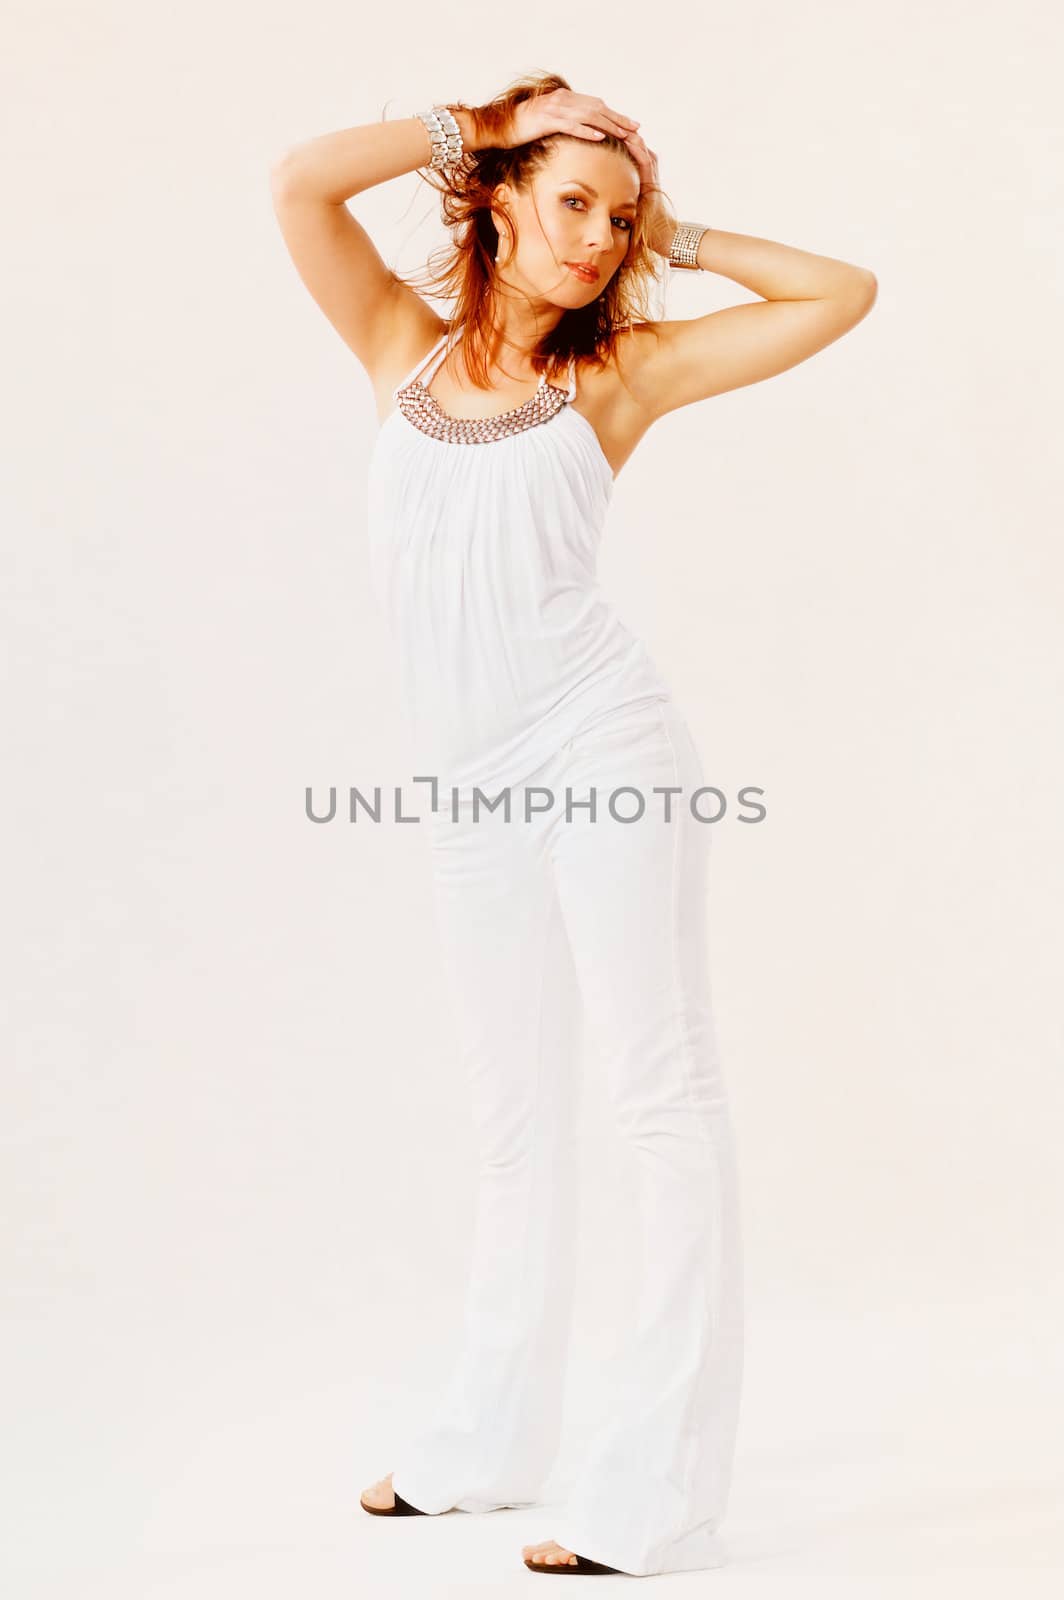 A beautiful woman in white. Isolated on light background